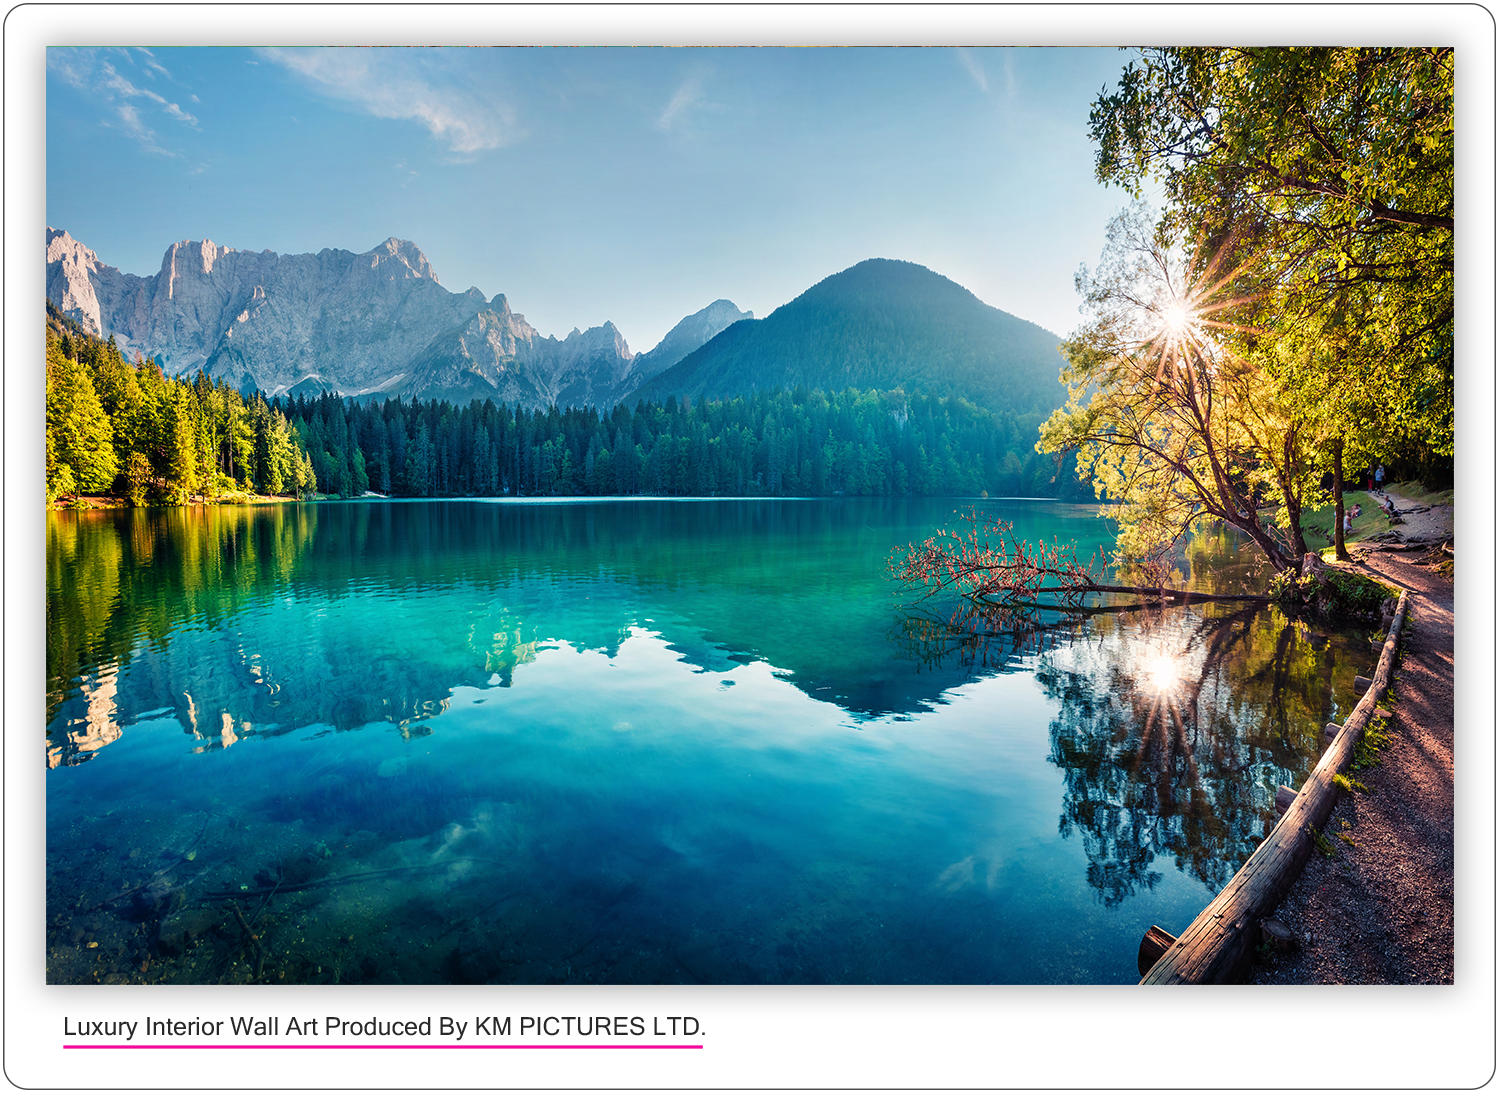 Colourful summer view of Fusine lake